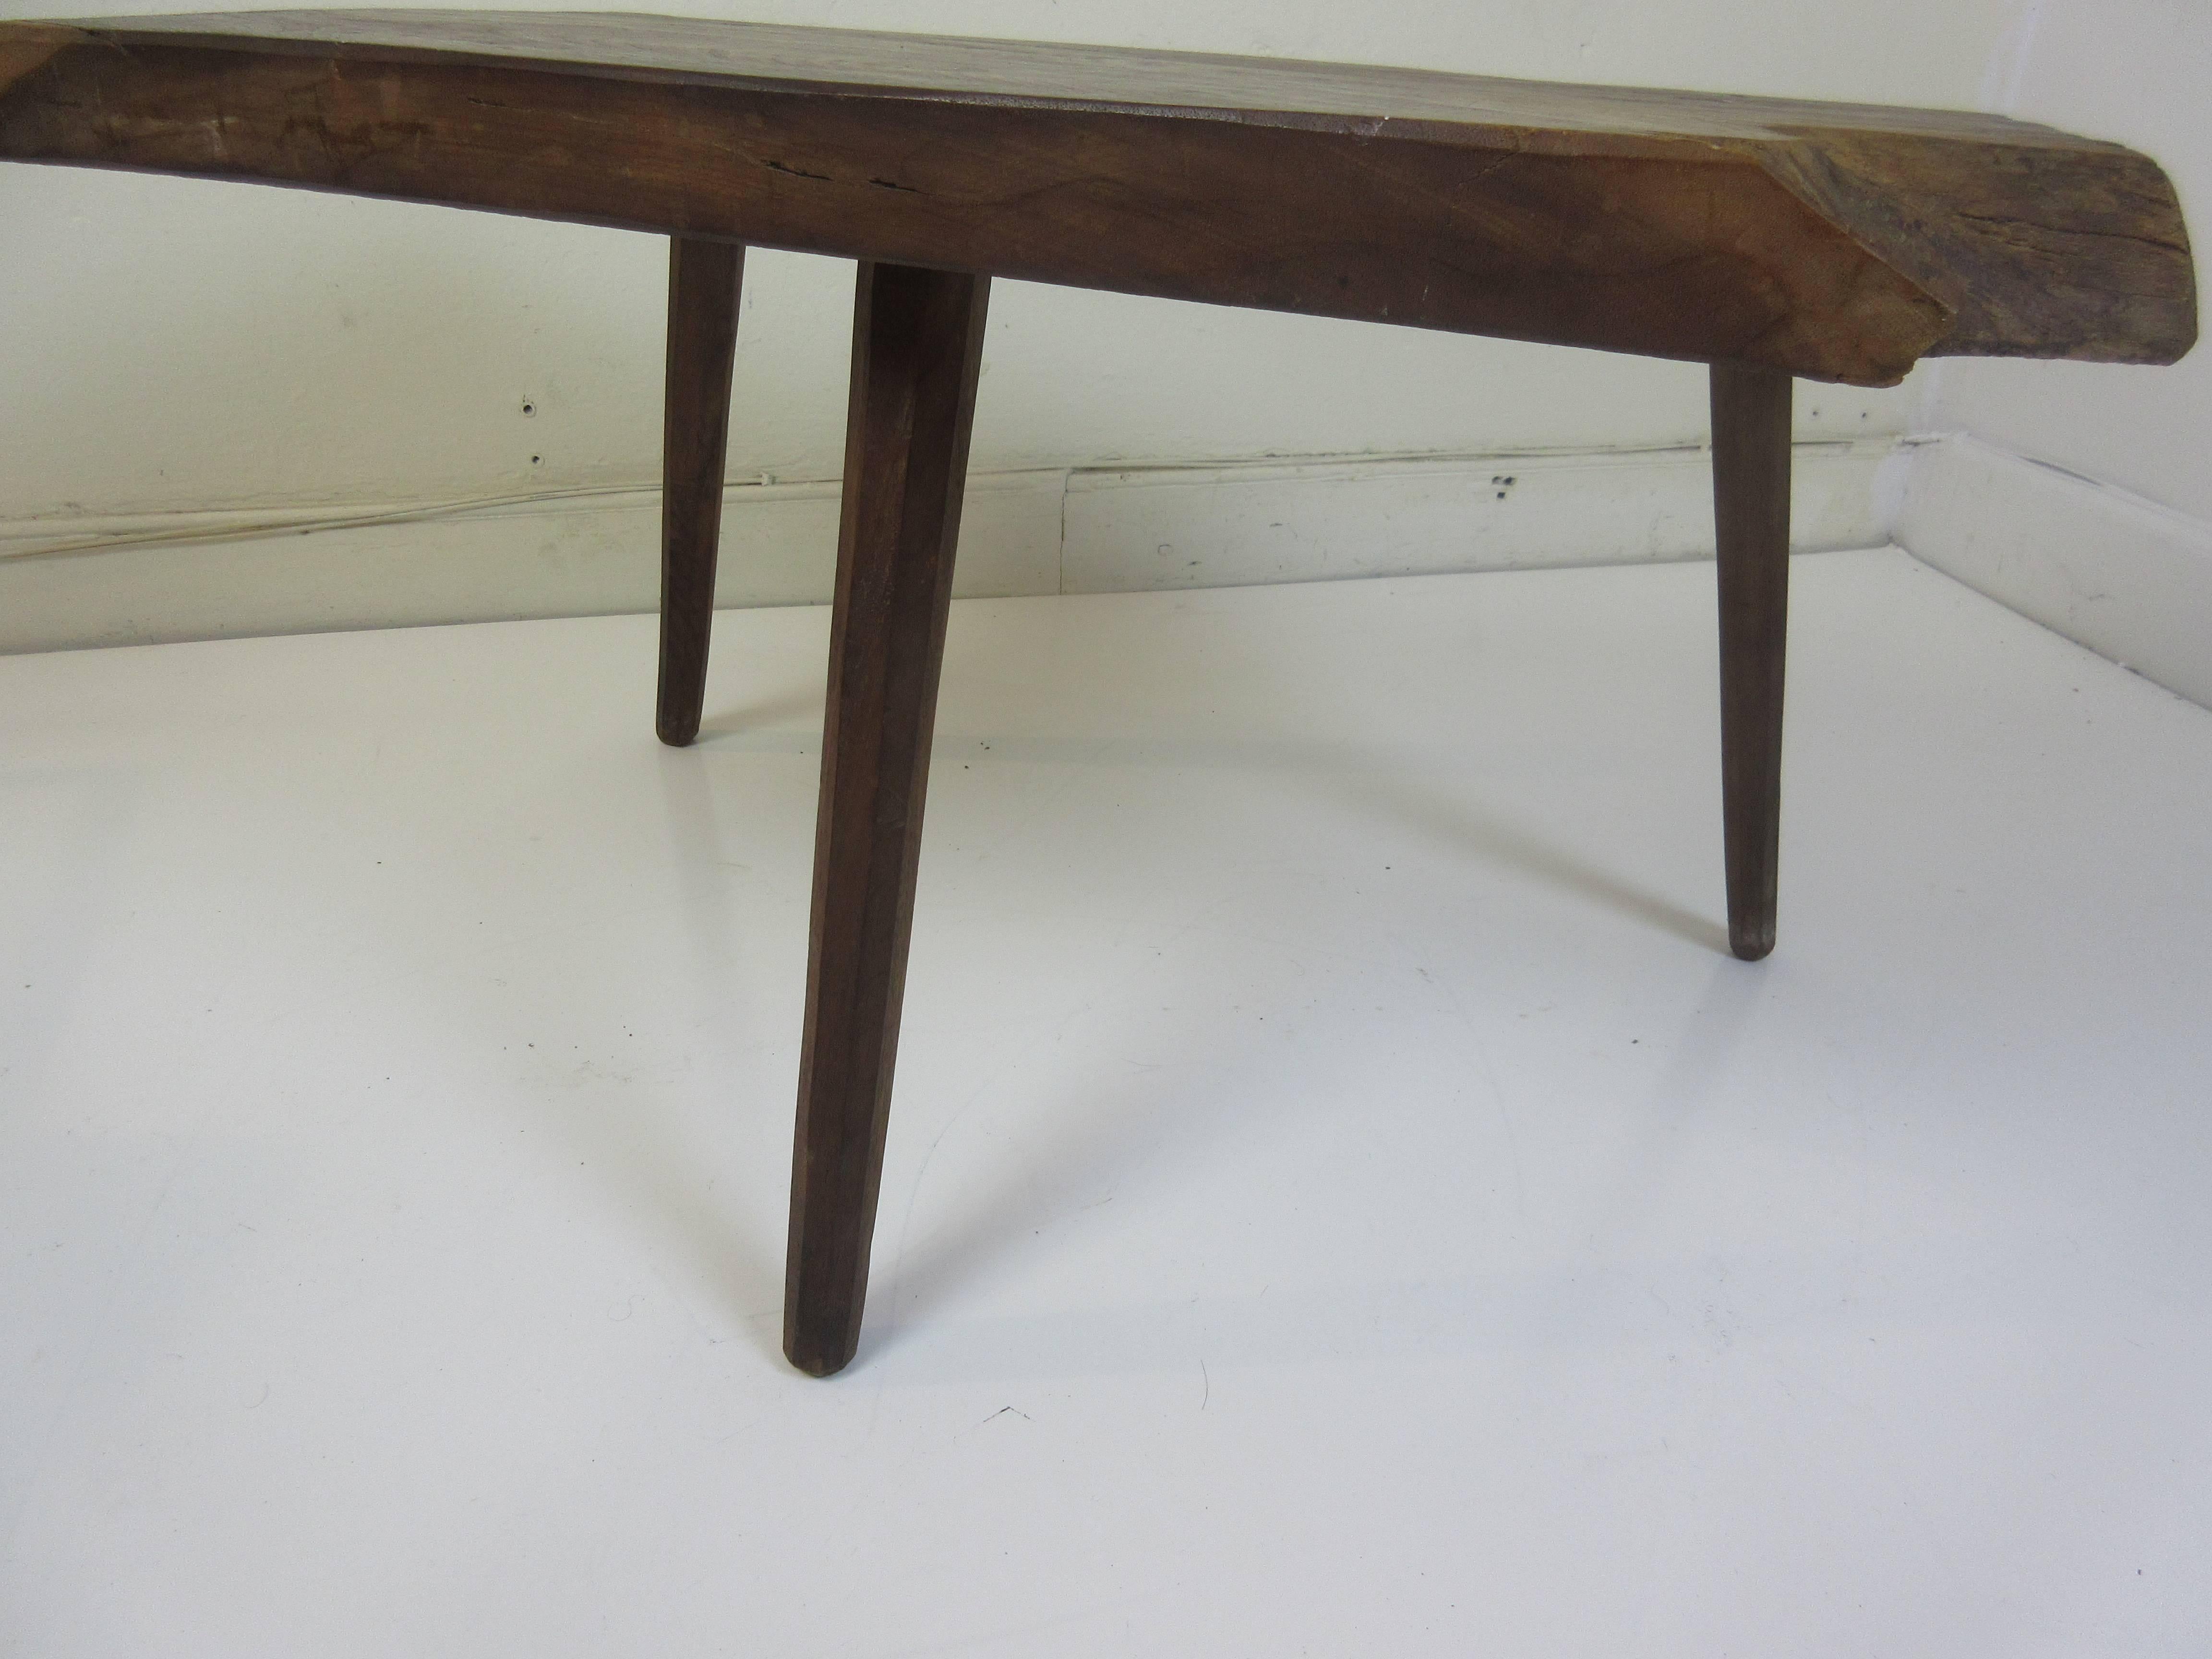 Side or coffee table in the style of Nakashima with a date of 1973 carved on the underside. Rough natural edged top with three angled legs with faceted sides.